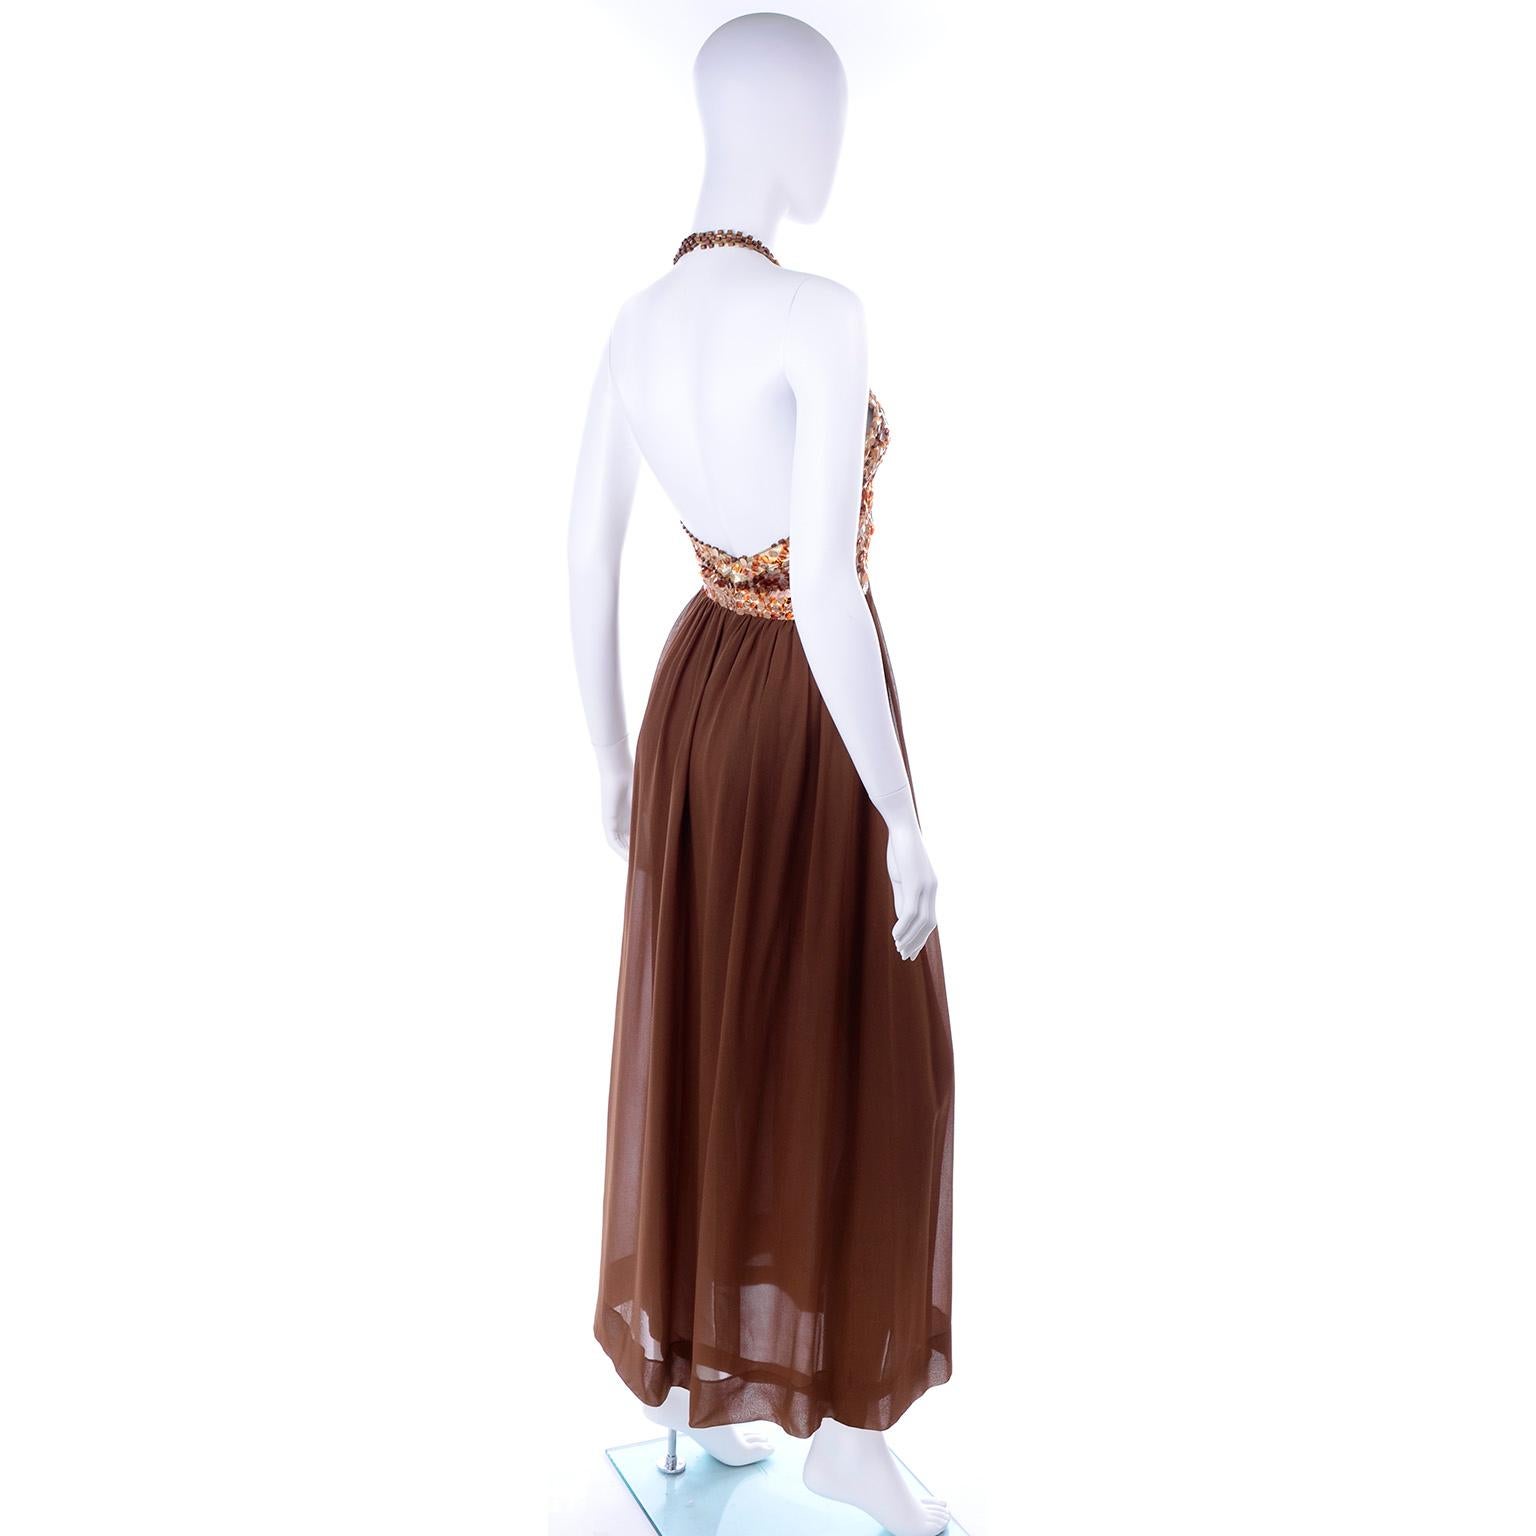 1996 Givenchy Vintage Chocolate Brown Silk Halter Beaded Evening Dress In Excellent Condition For Sale In Portland, OR